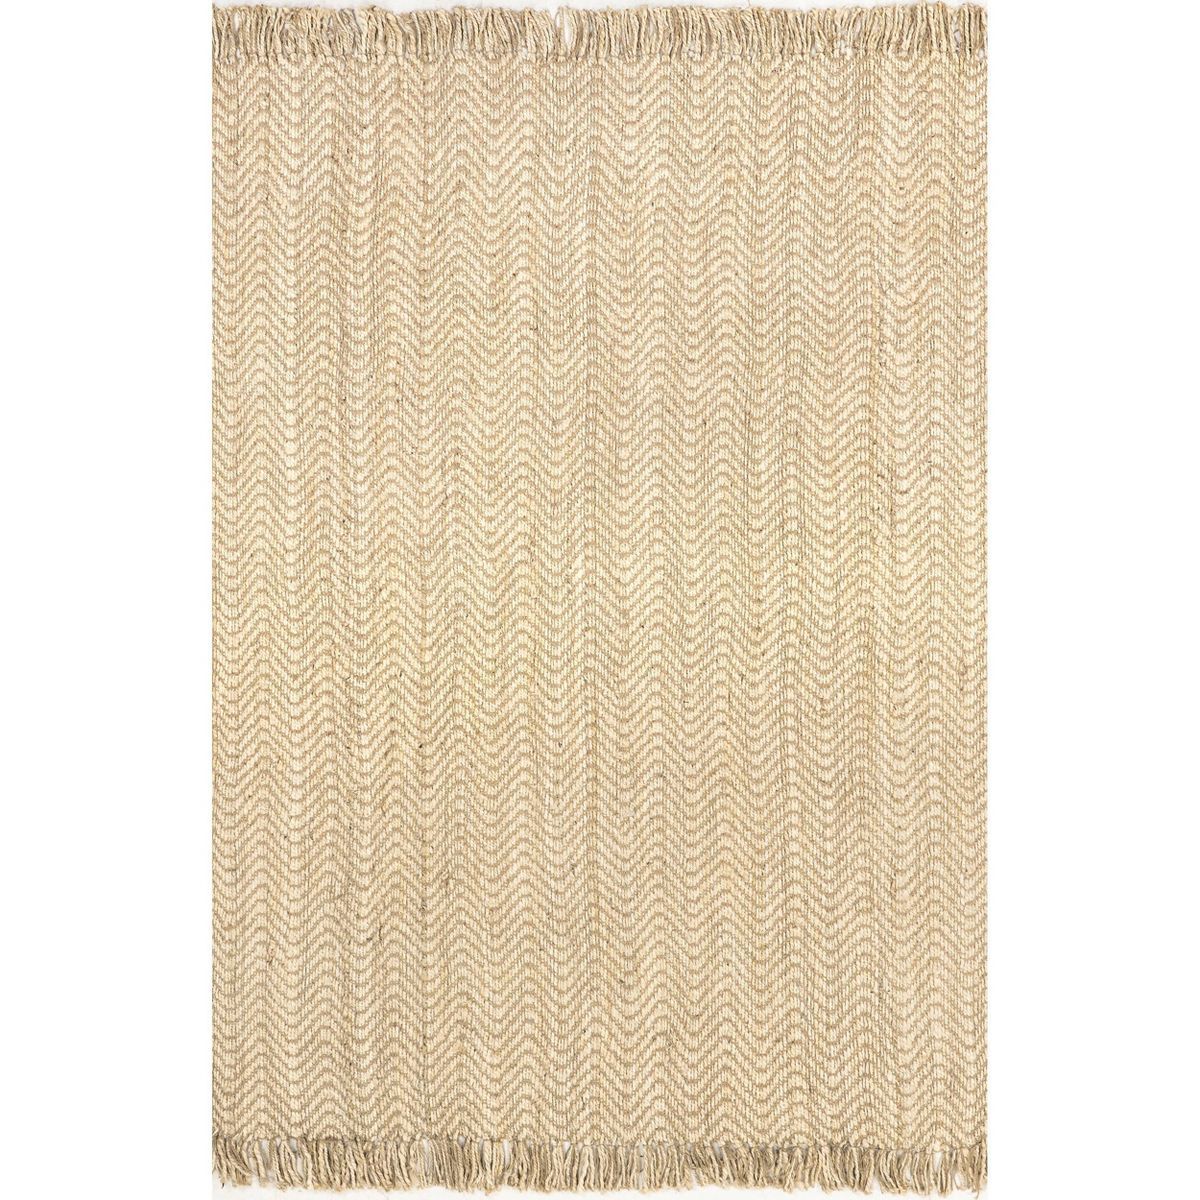 3'x5' Hand Woven Don Jute with fringe Area Rug Brown - nuLOOM | Target